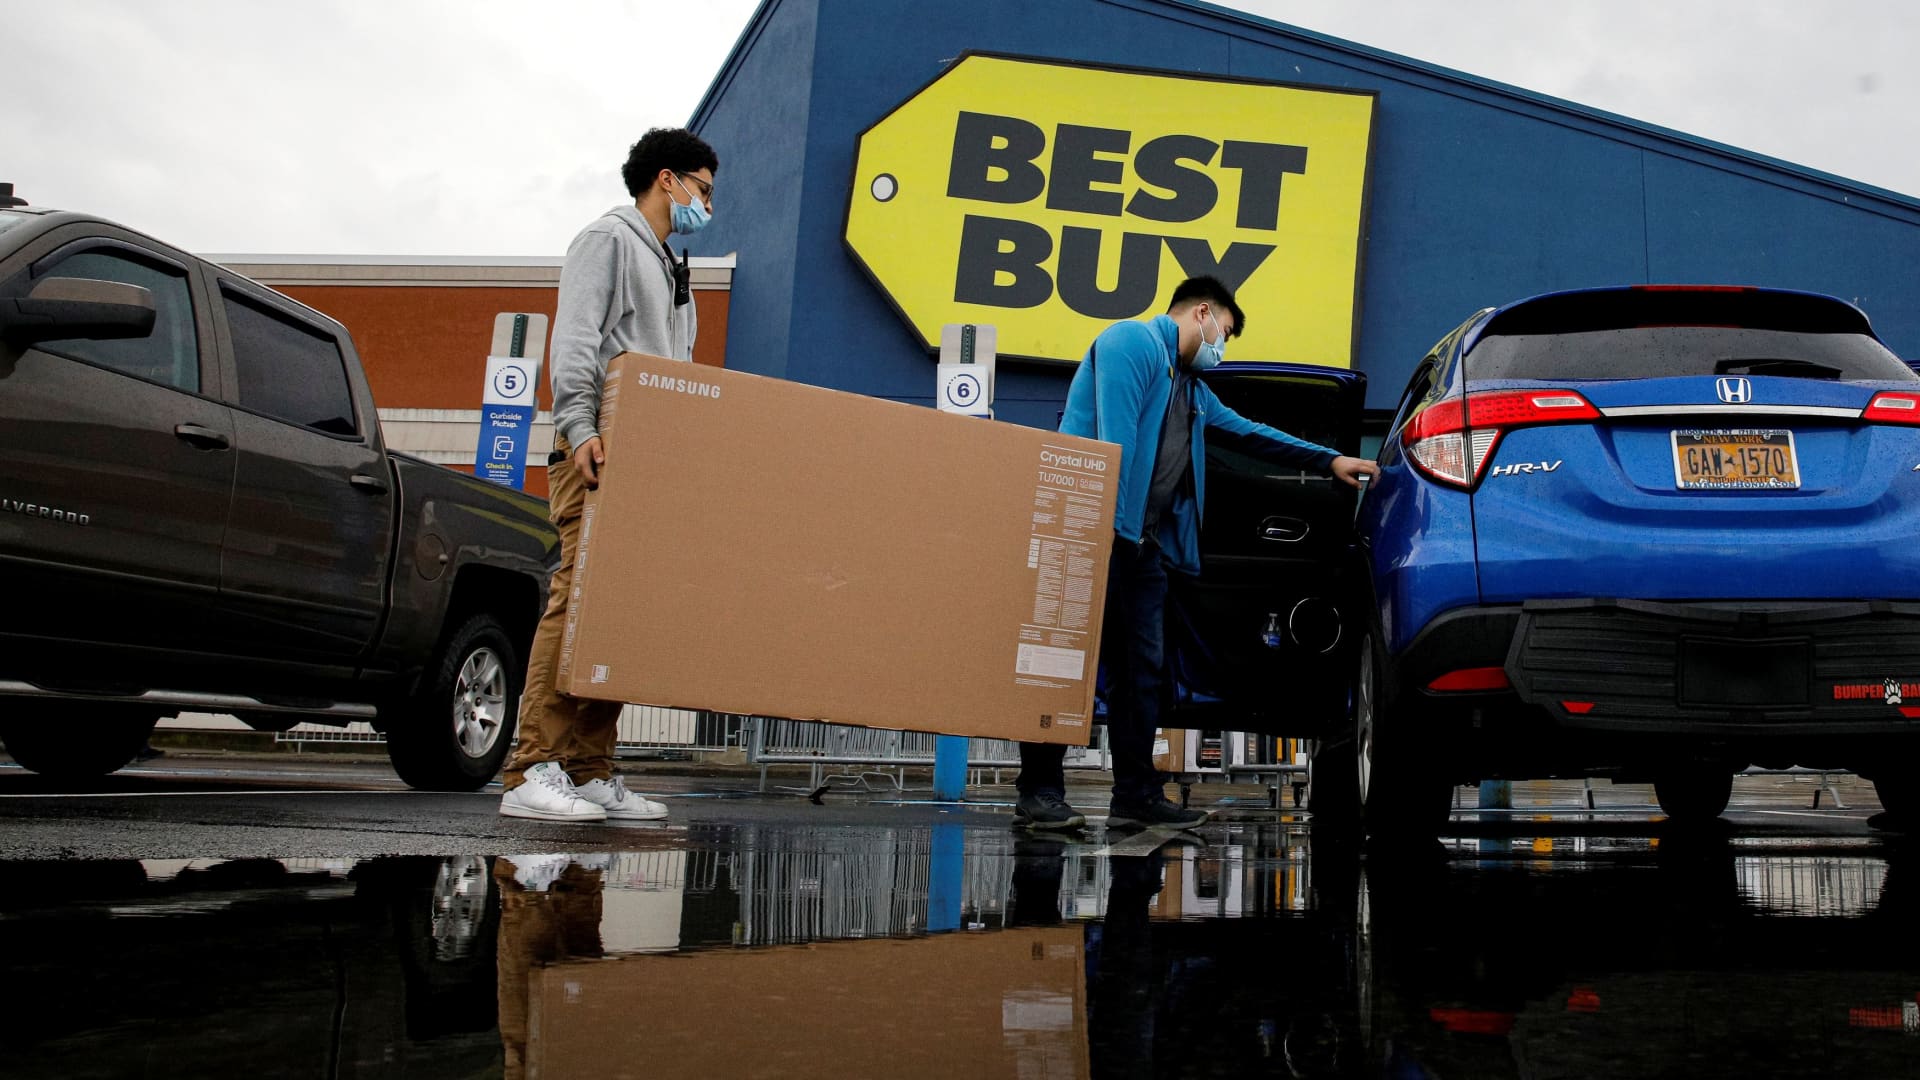 Shoppers exit a Best Buy store during Black Friday sales in Brooklyn, New York, November 26, 2021.